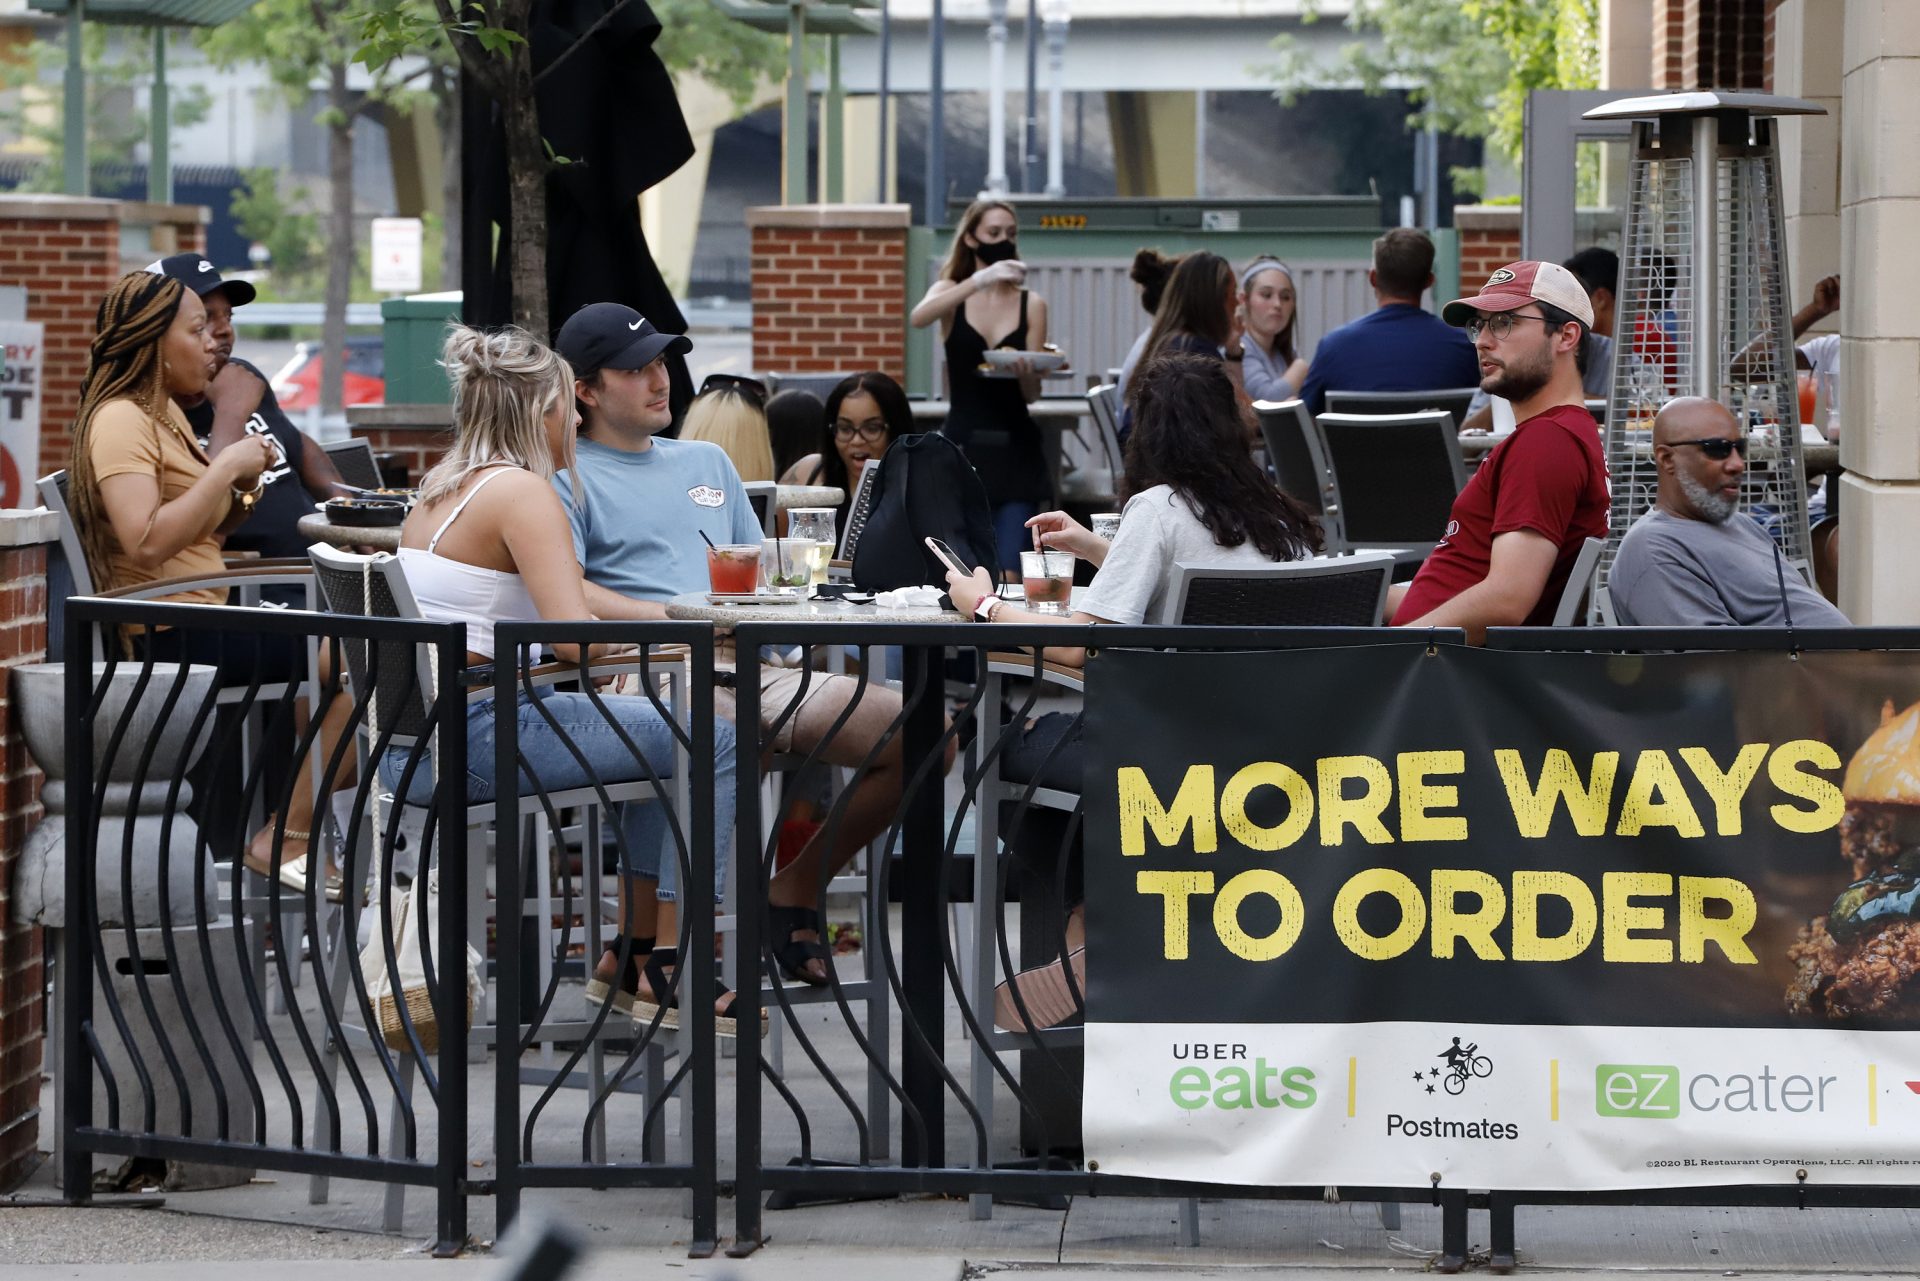 People gather at tables outside Bar Louie on the Northside of Pittsburgh Sunday, June 28, 2020. In response to the recent spike in COVID-19 cases in Allegheny County, health officials are ordering all bars and restaurants in the county to stop the sale of alcohol for on-site consumption beginning on June 30.